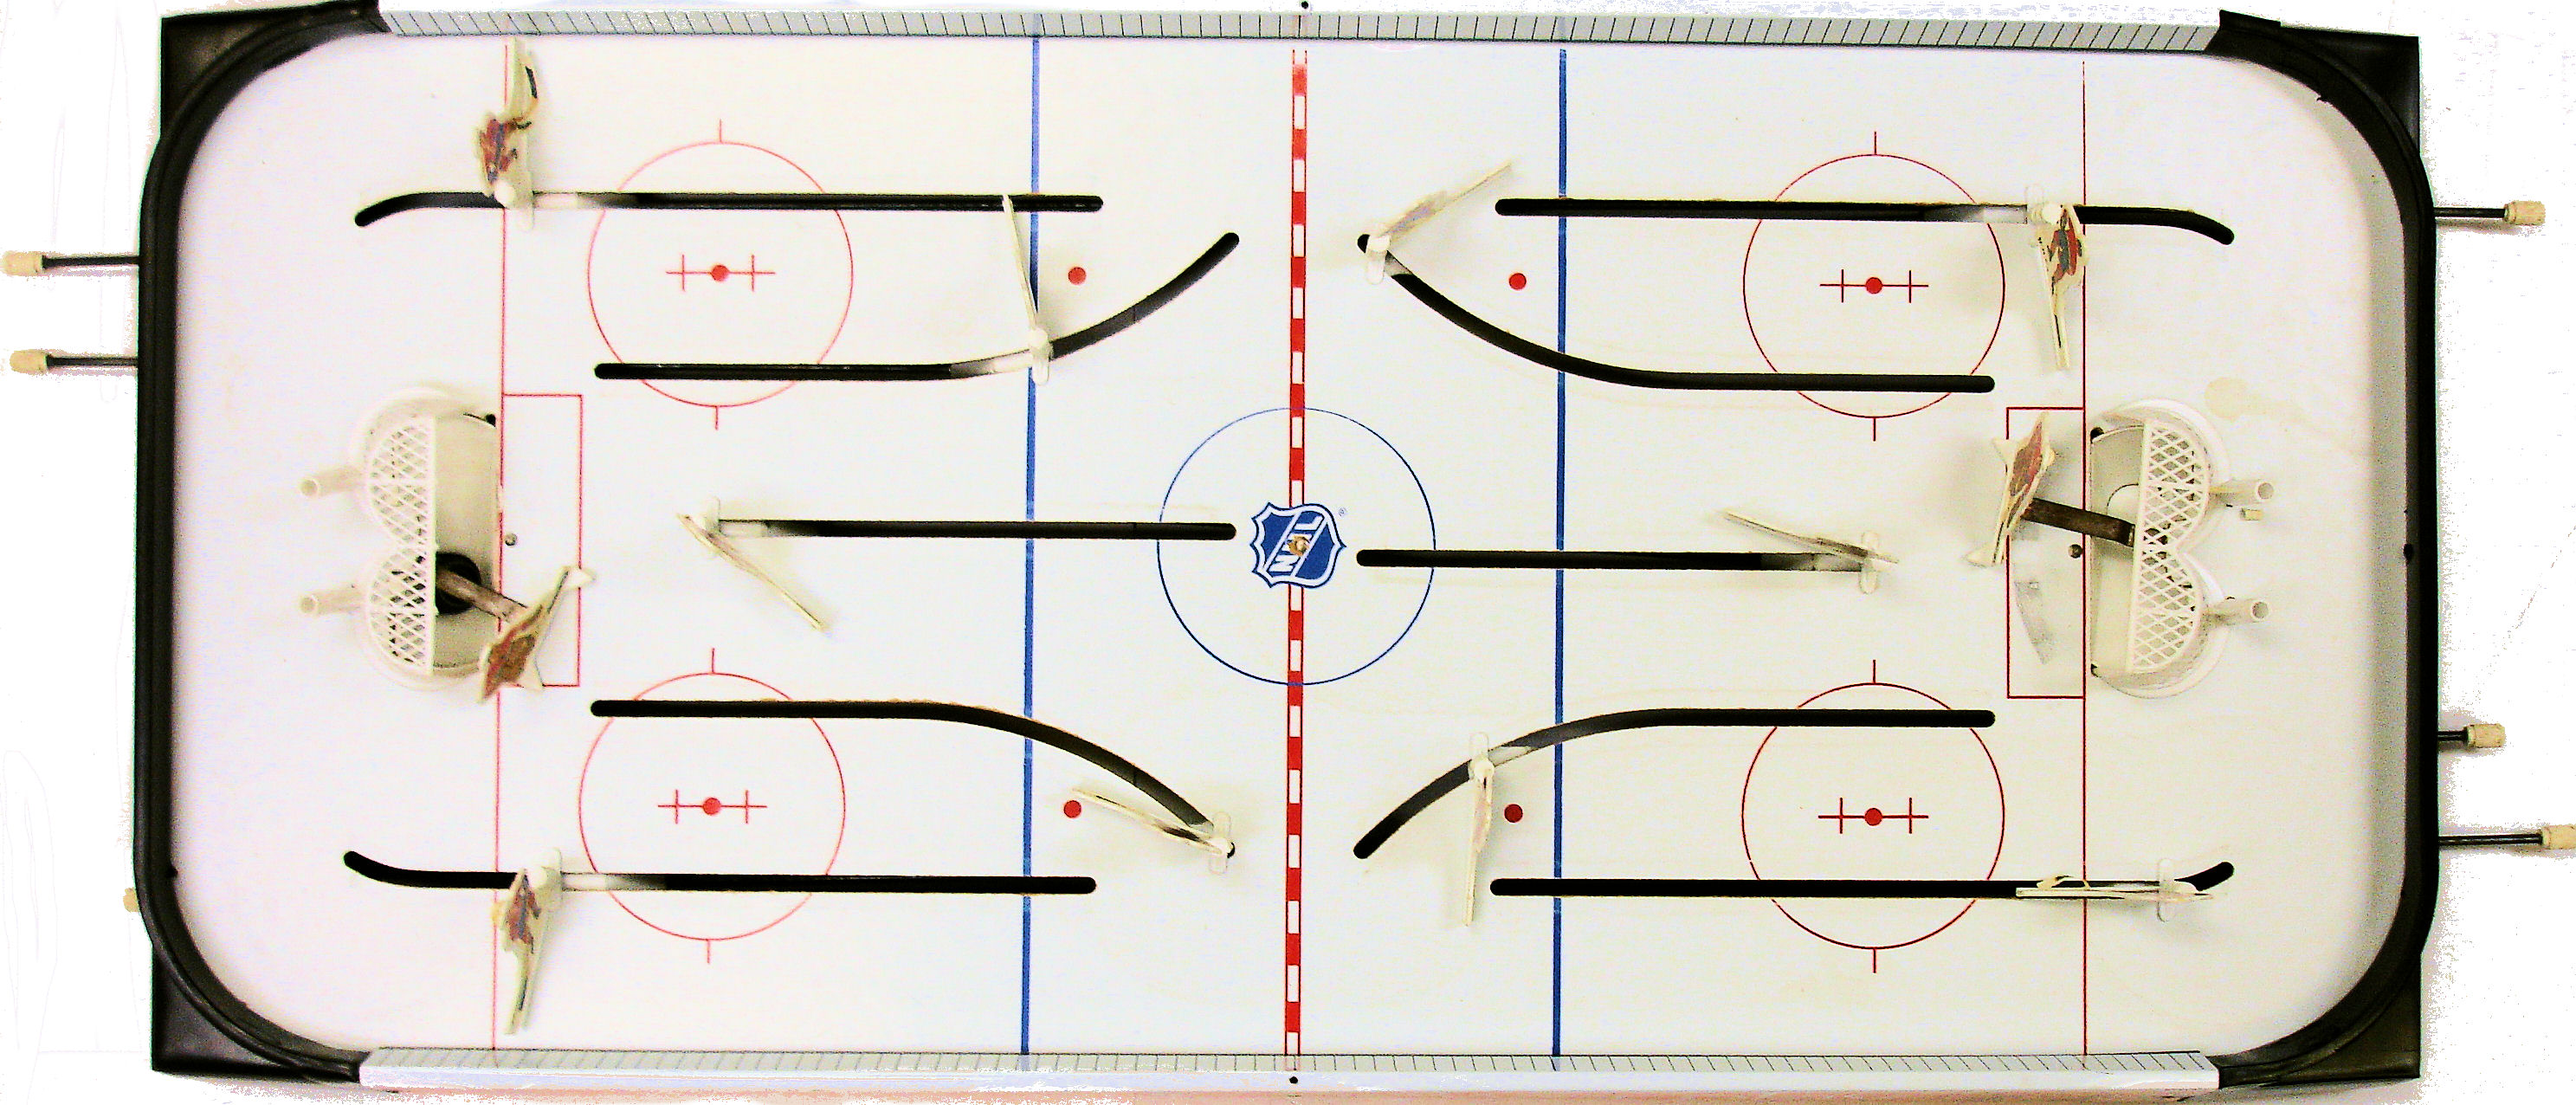 Stanley Cup board